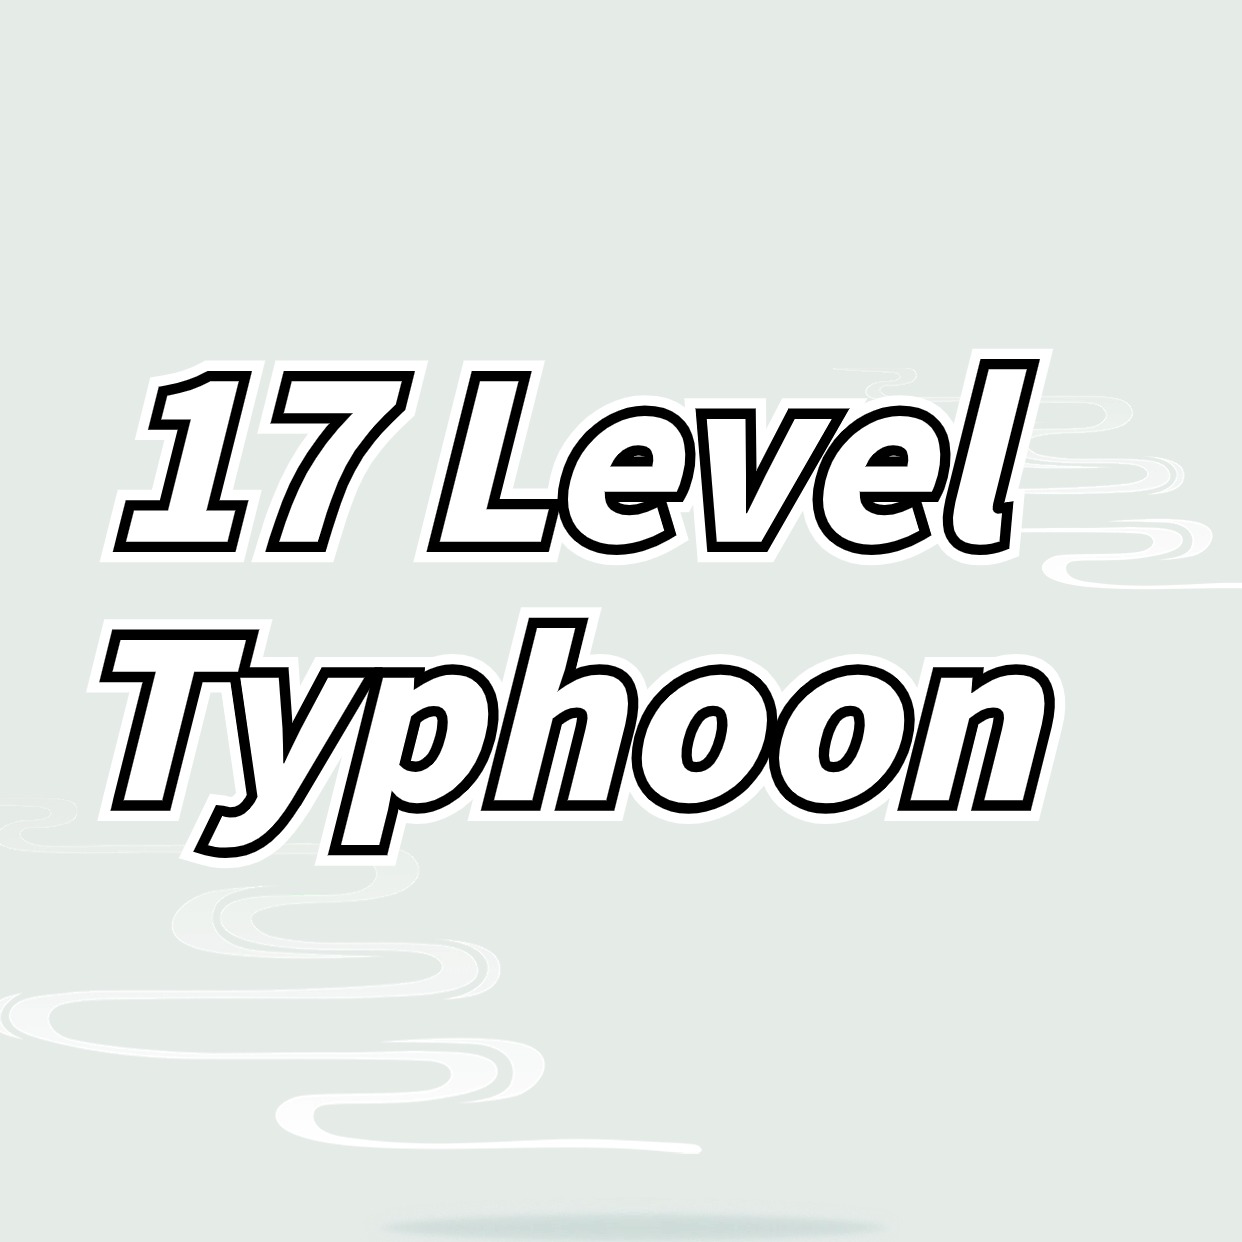 17 Level Typhoon in Guangdong, China